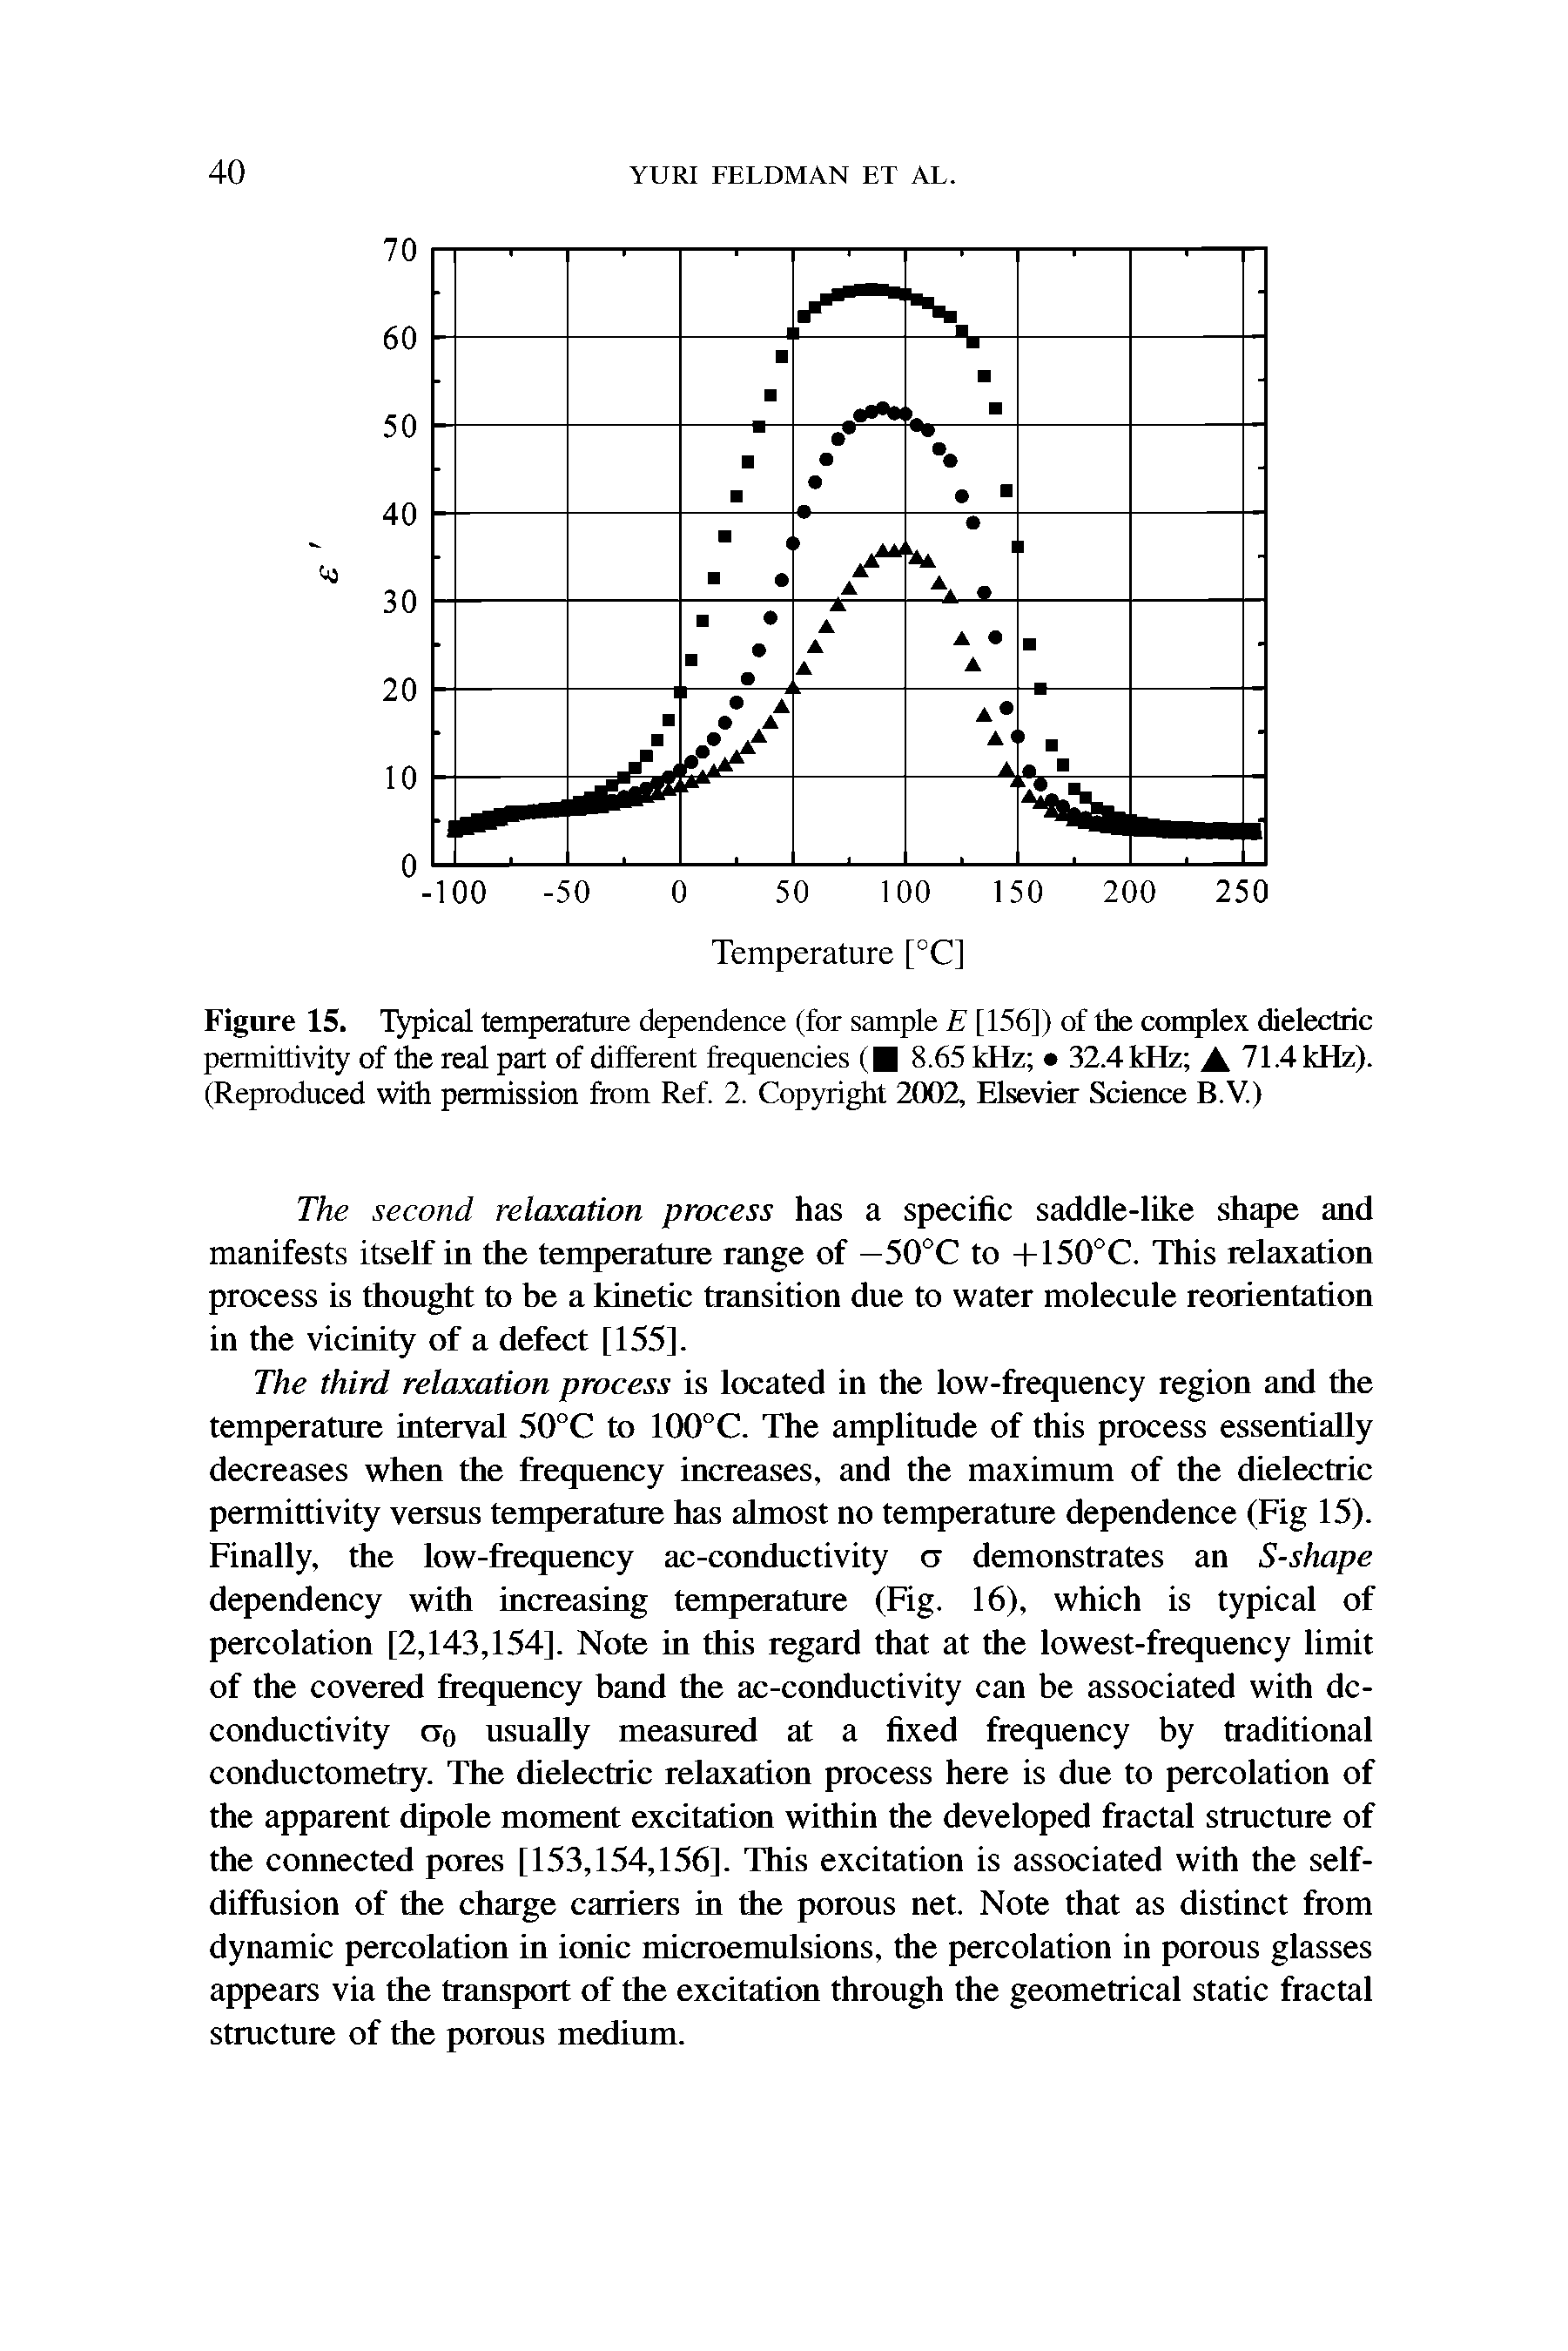 Figure 15. Typical temperature dependence (for sample E [156]) of the complex dielectric permittivity of the real part of different frequencies ( 8.65 kHz 32.4 kHz A 71.4 kHz). (Reproduced with permission from Ref. 2. Copyright 2002, Elsevier Science B.V.)...